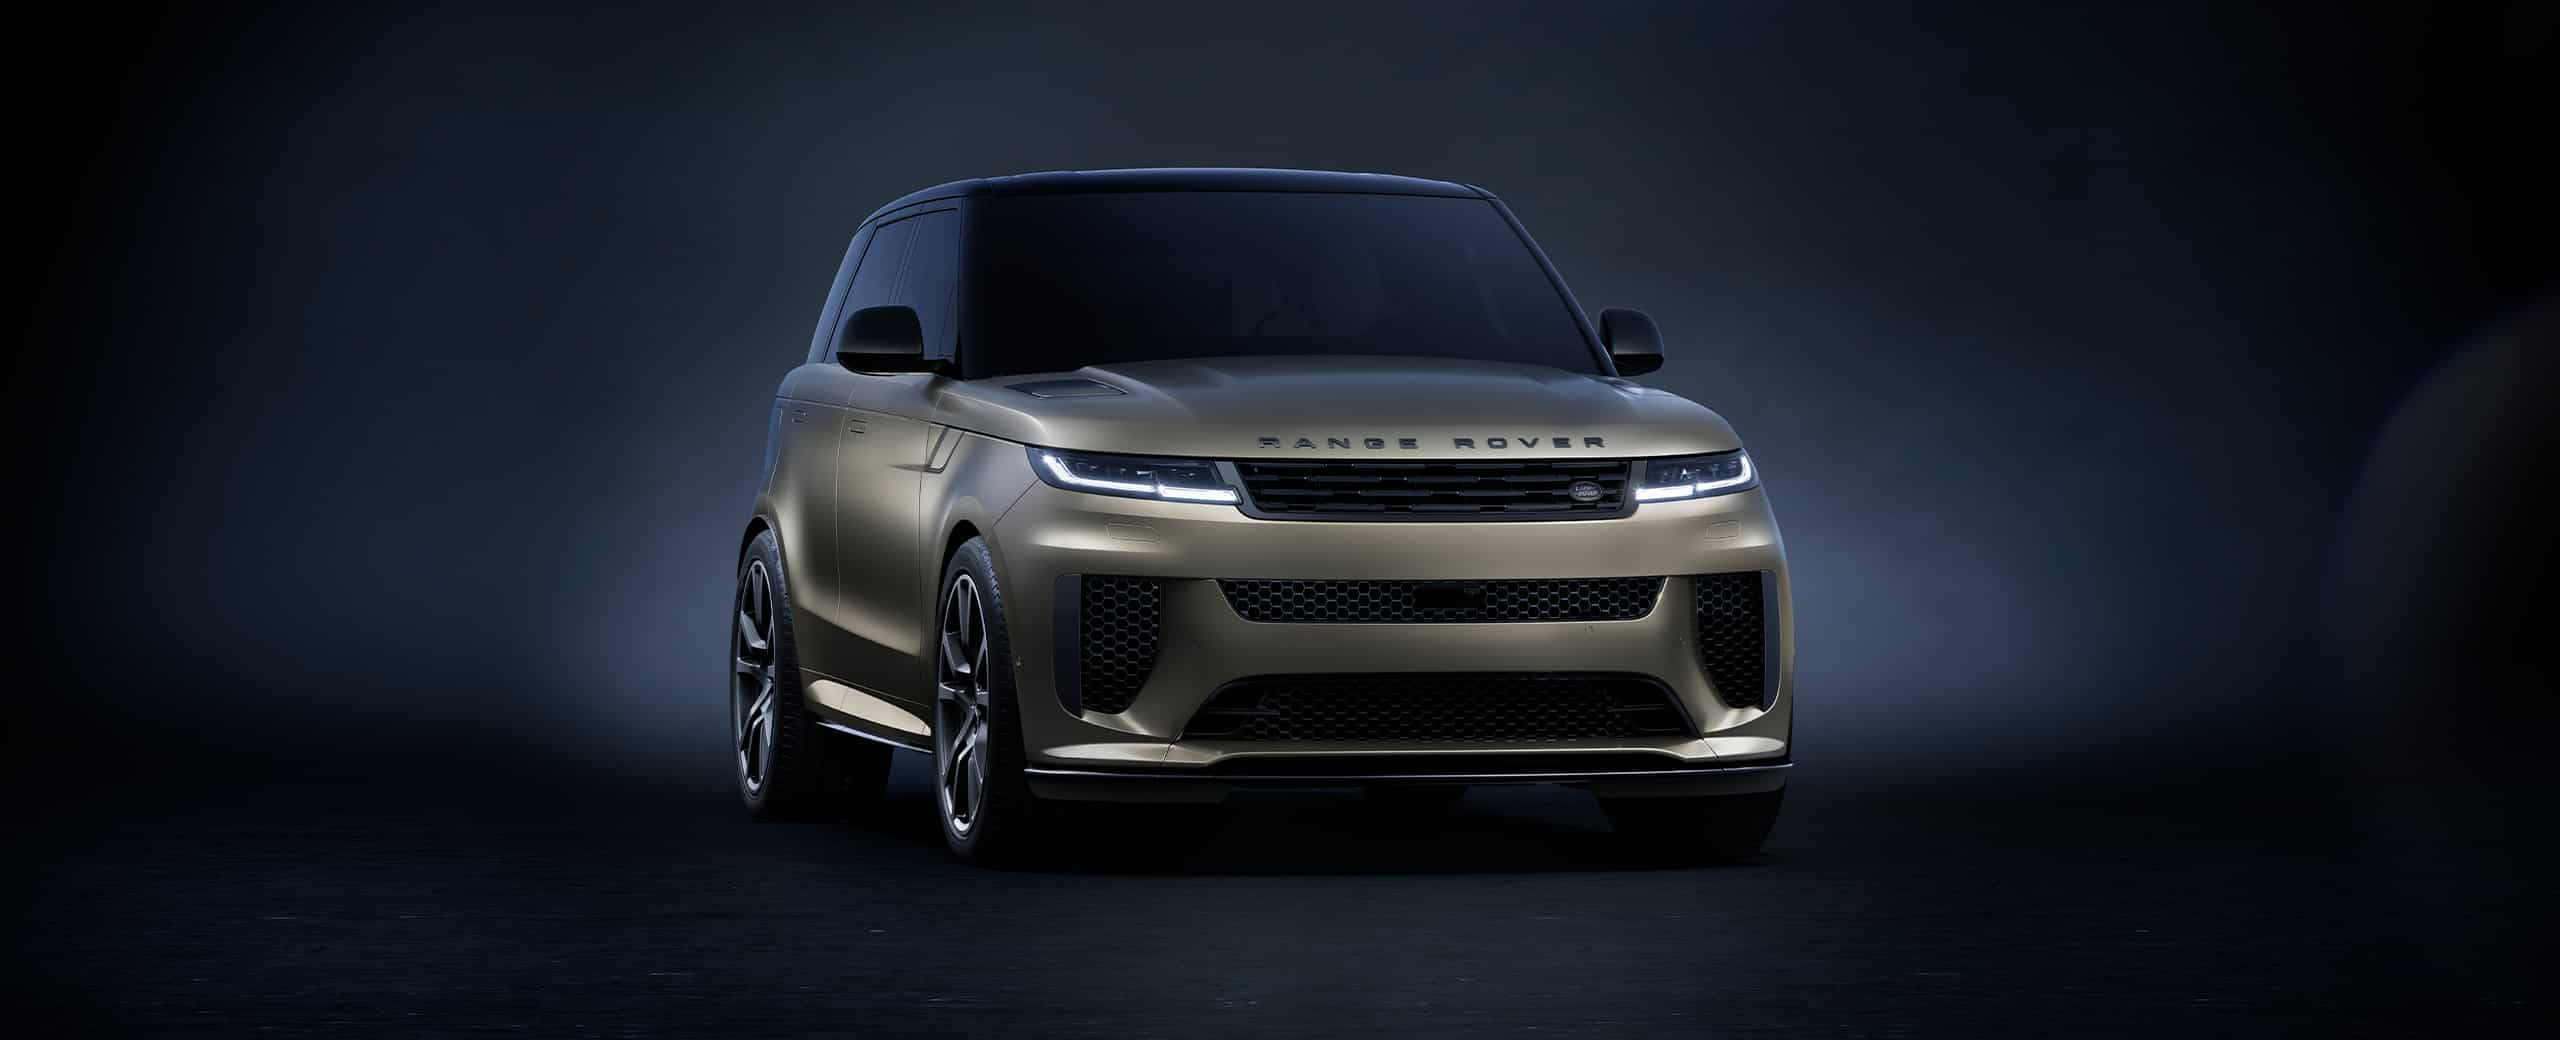 NEW ENGINE AND ADVANCED TECHNOLOGY FOR RANGE ROVER SPORT